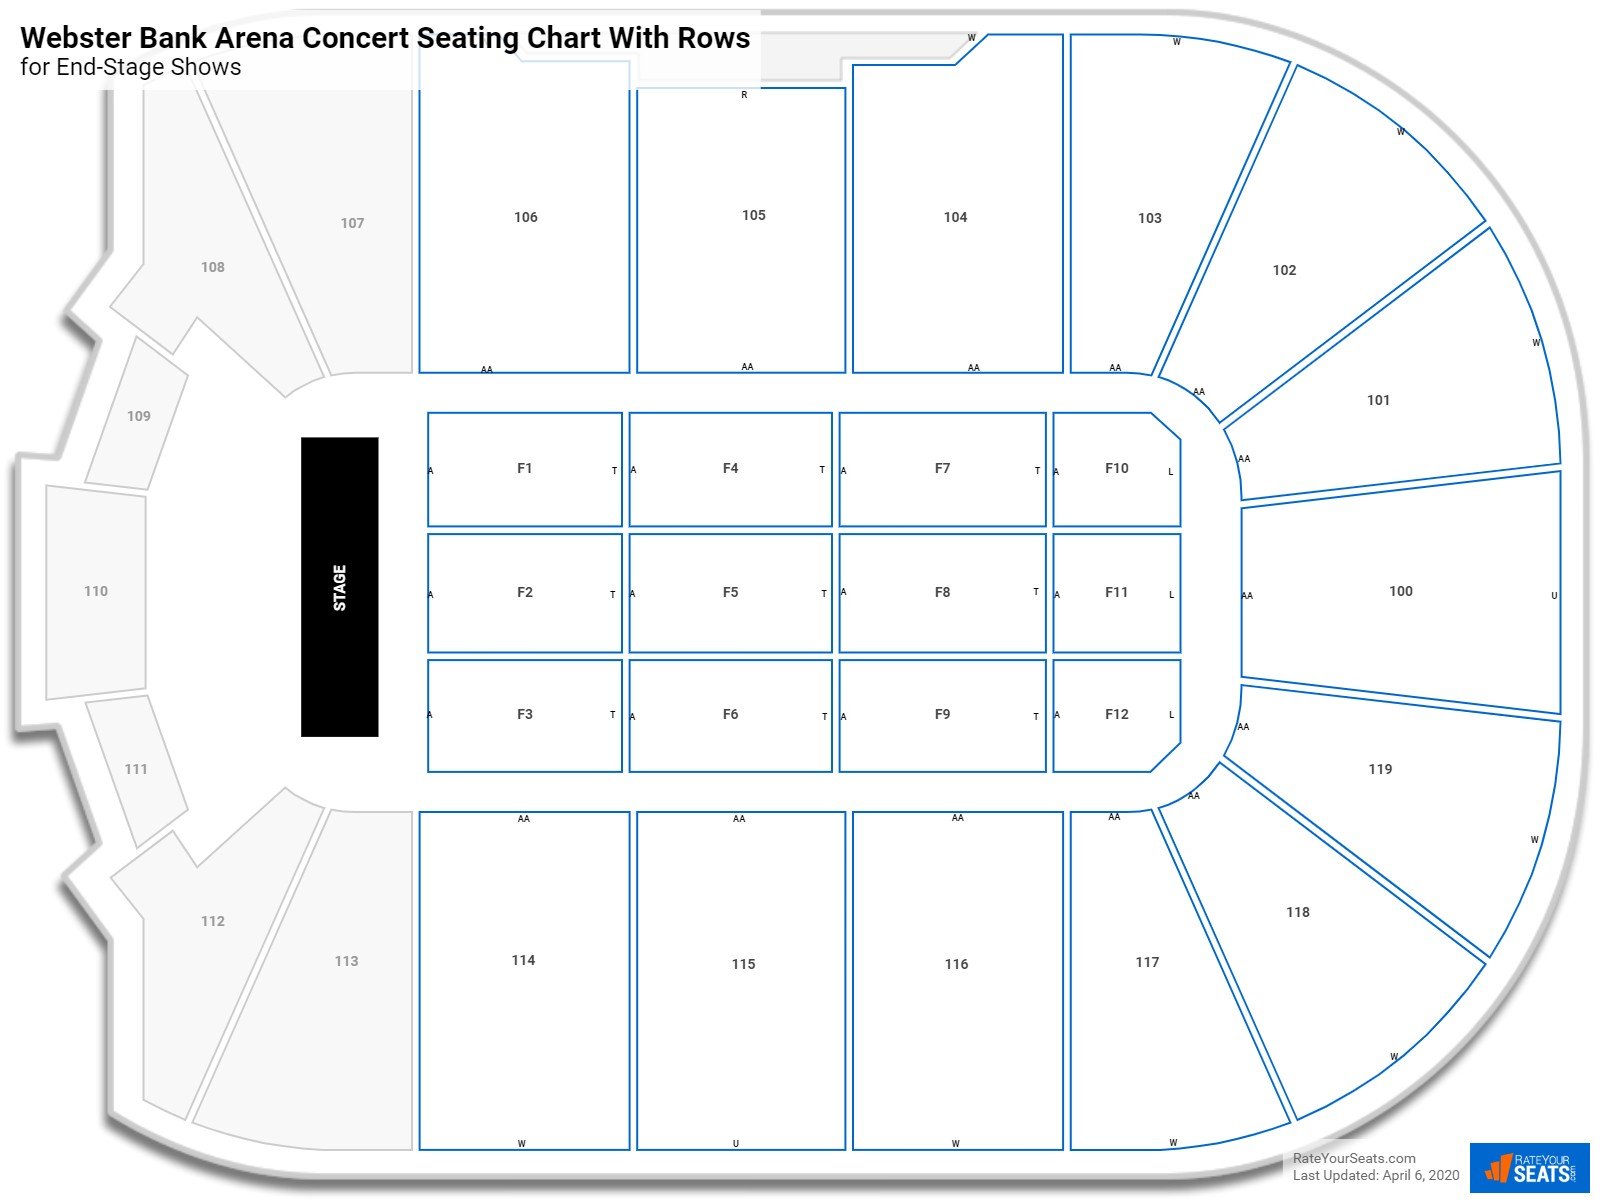 Total Mortgage Arena seating chart with row numbers